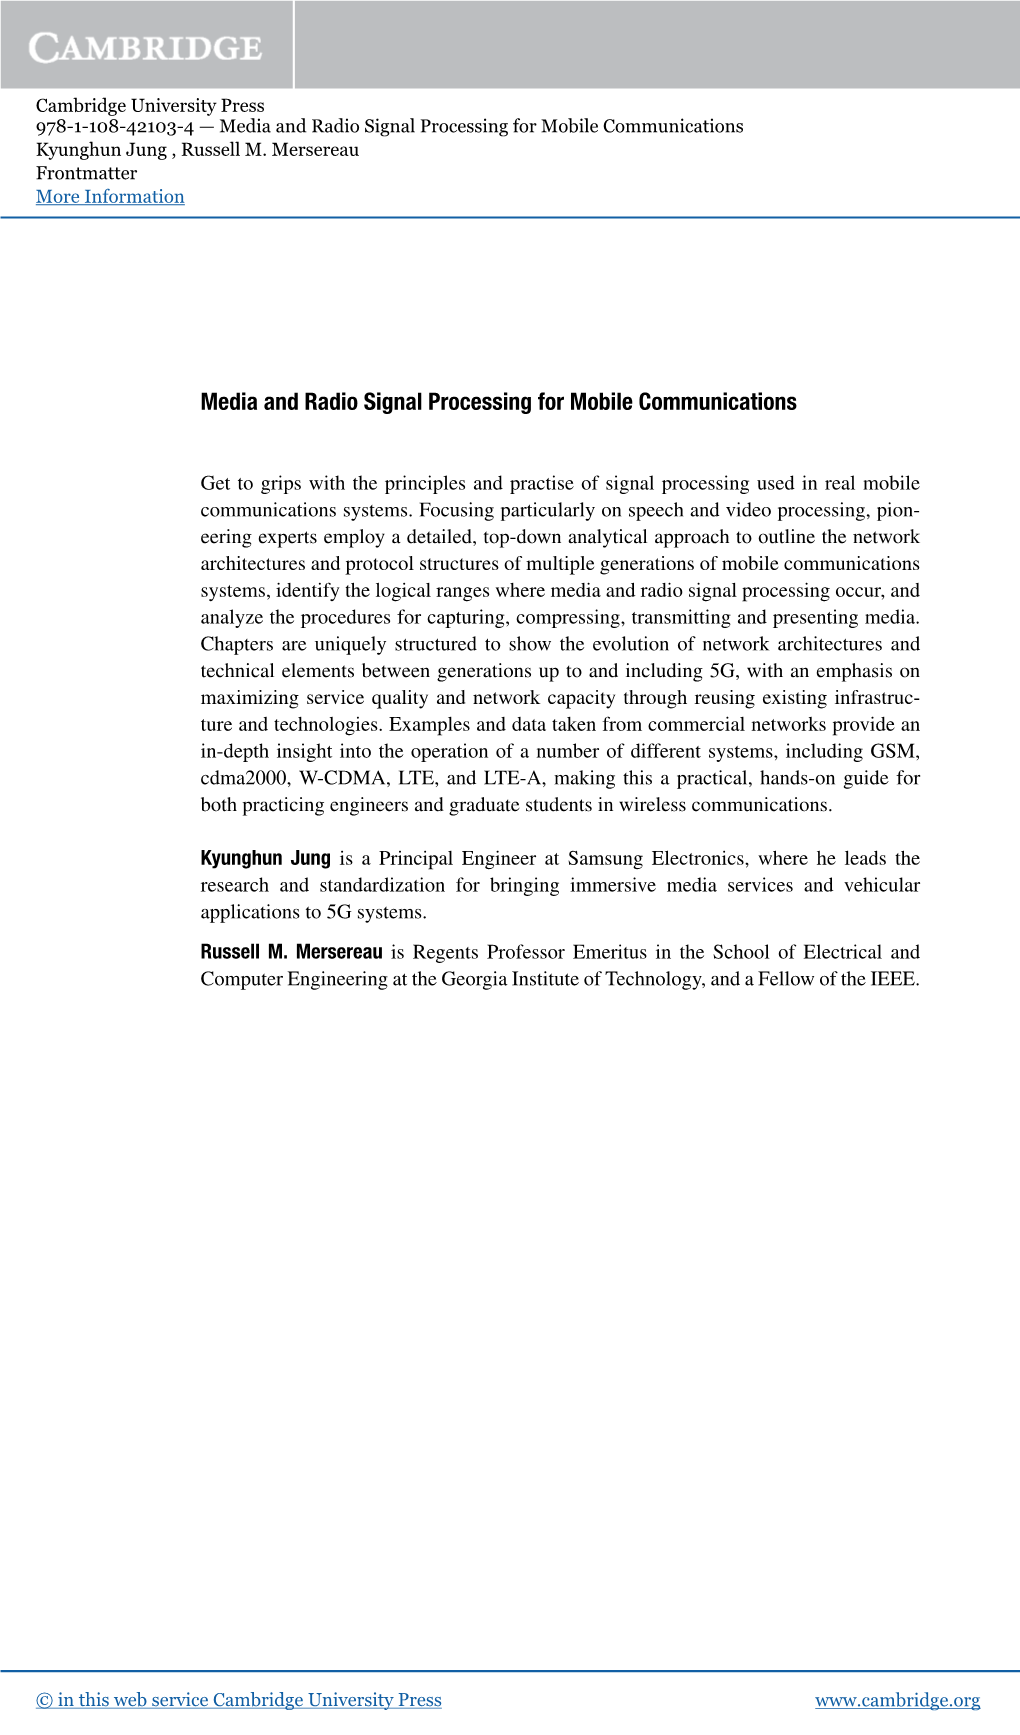 Media and Radio Signal Processing for Mobile Communications Kyunghun Jung , Russell M